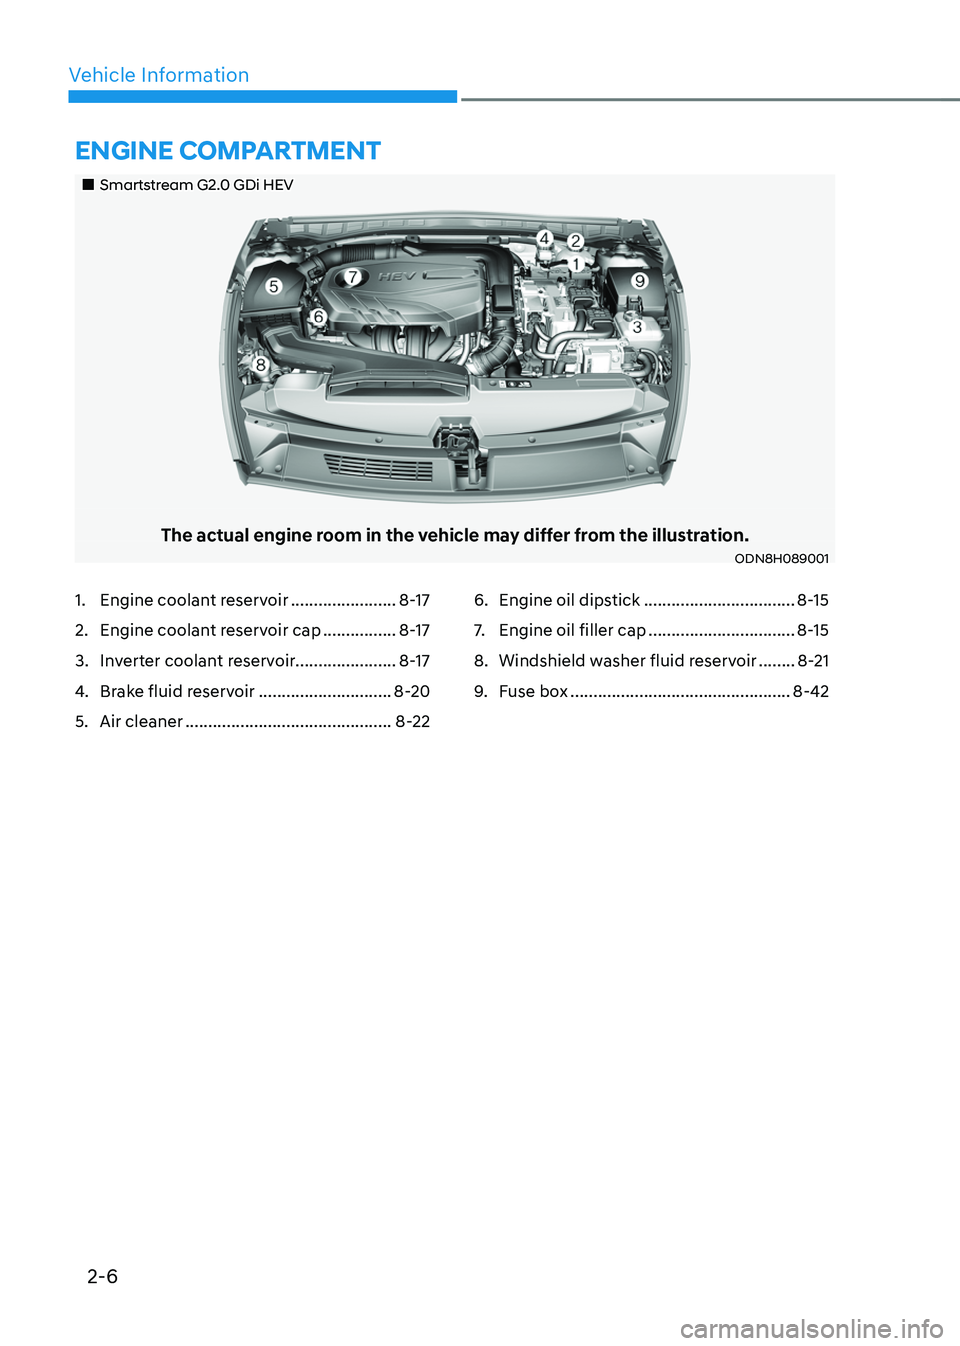 HYUNDAI SONATA HYBRID 2022  Owners Manual 2-6
Vehicle Information
„„Smartstream G2.0 GDi HEV
The actual engine room in the vehicle may differ from the illustration.ODN8H089001
ENGINE COMPARTMENT
1. Engine coolant reservoir .........